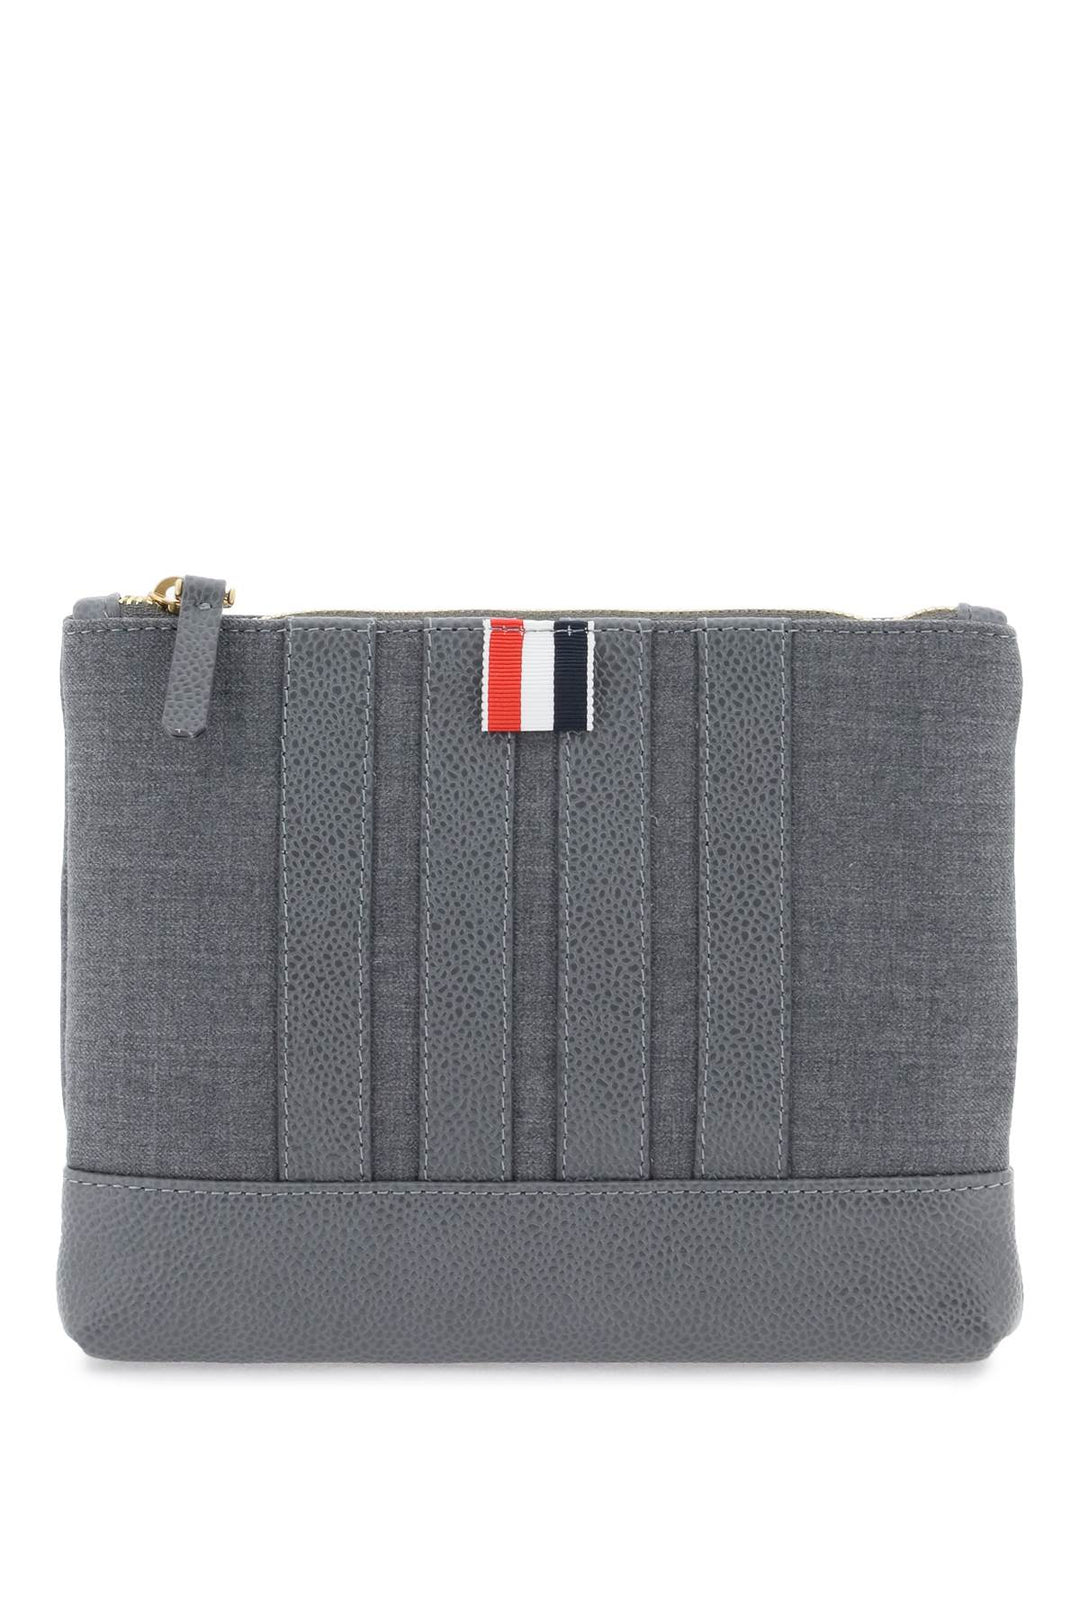 Thom browne wool 4-bar small pouch-0